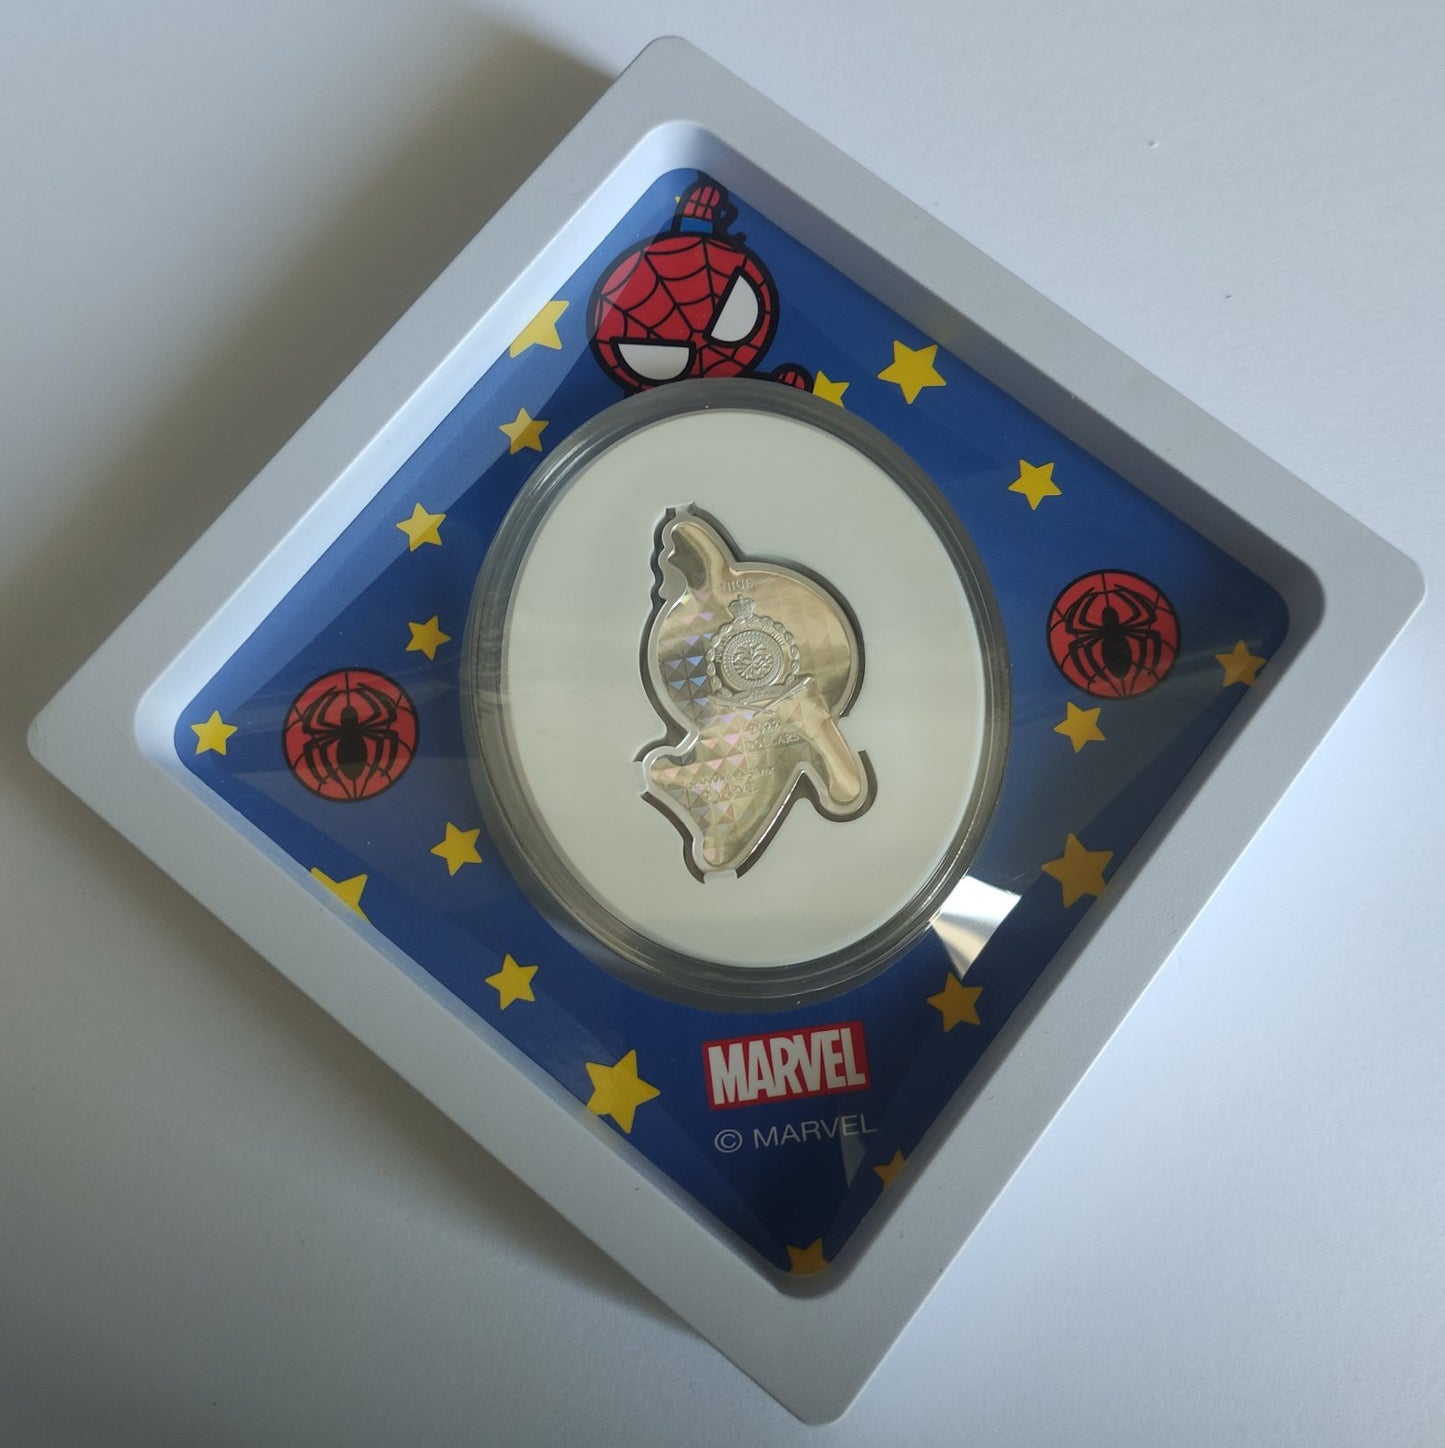 Kawaii Spiderman 1 oz Silver Proof Coin in Capsule with Case, Box, and COA